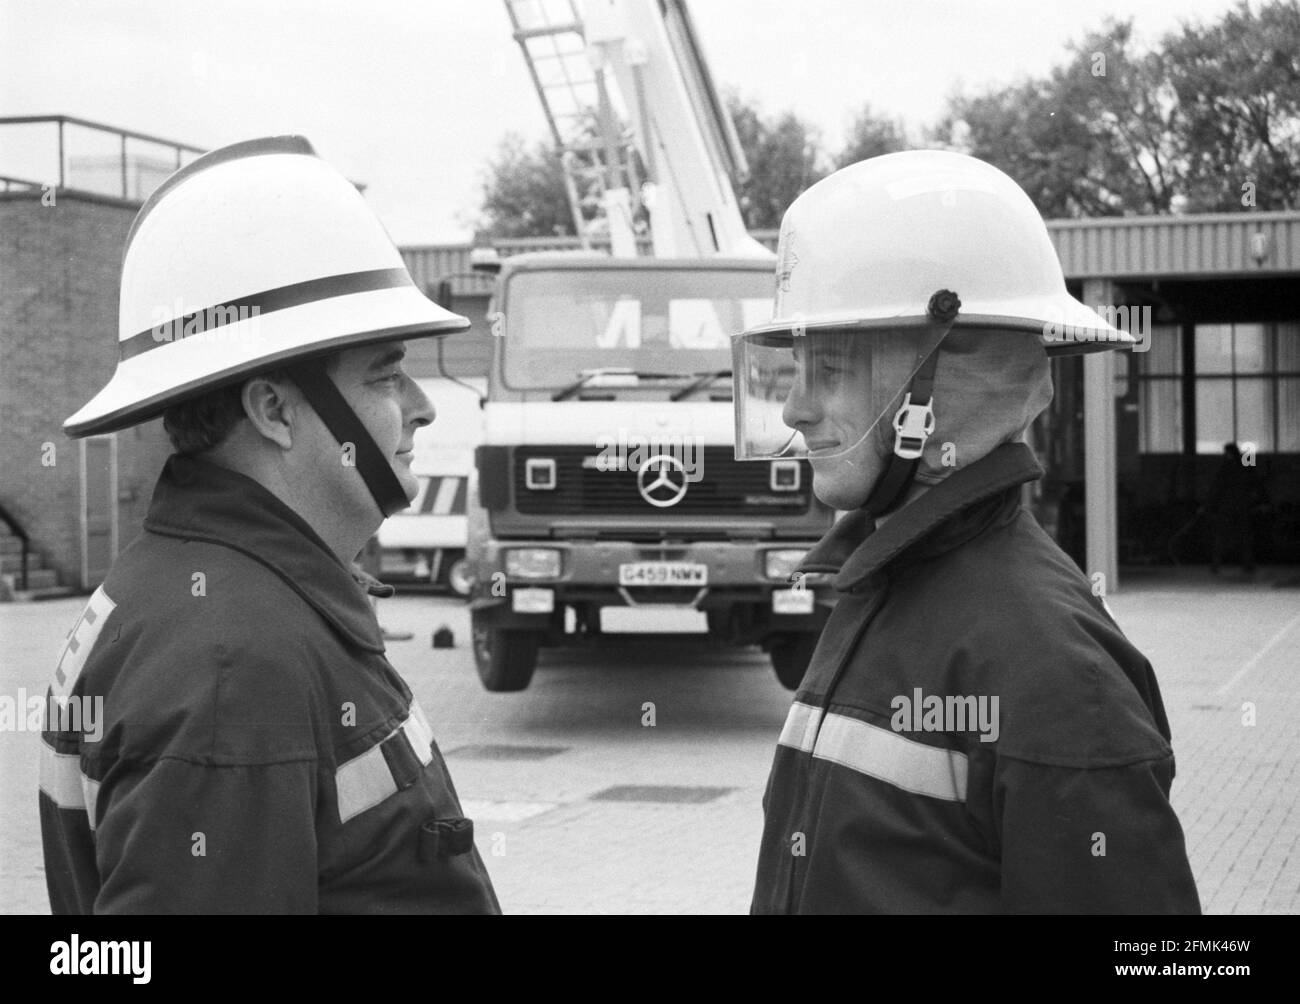 New v Old style of Firefighter's helmet. The new helmet, right, is unveiled at Wiltshire's Salisbury Fire Station in 1990. Stock Photo